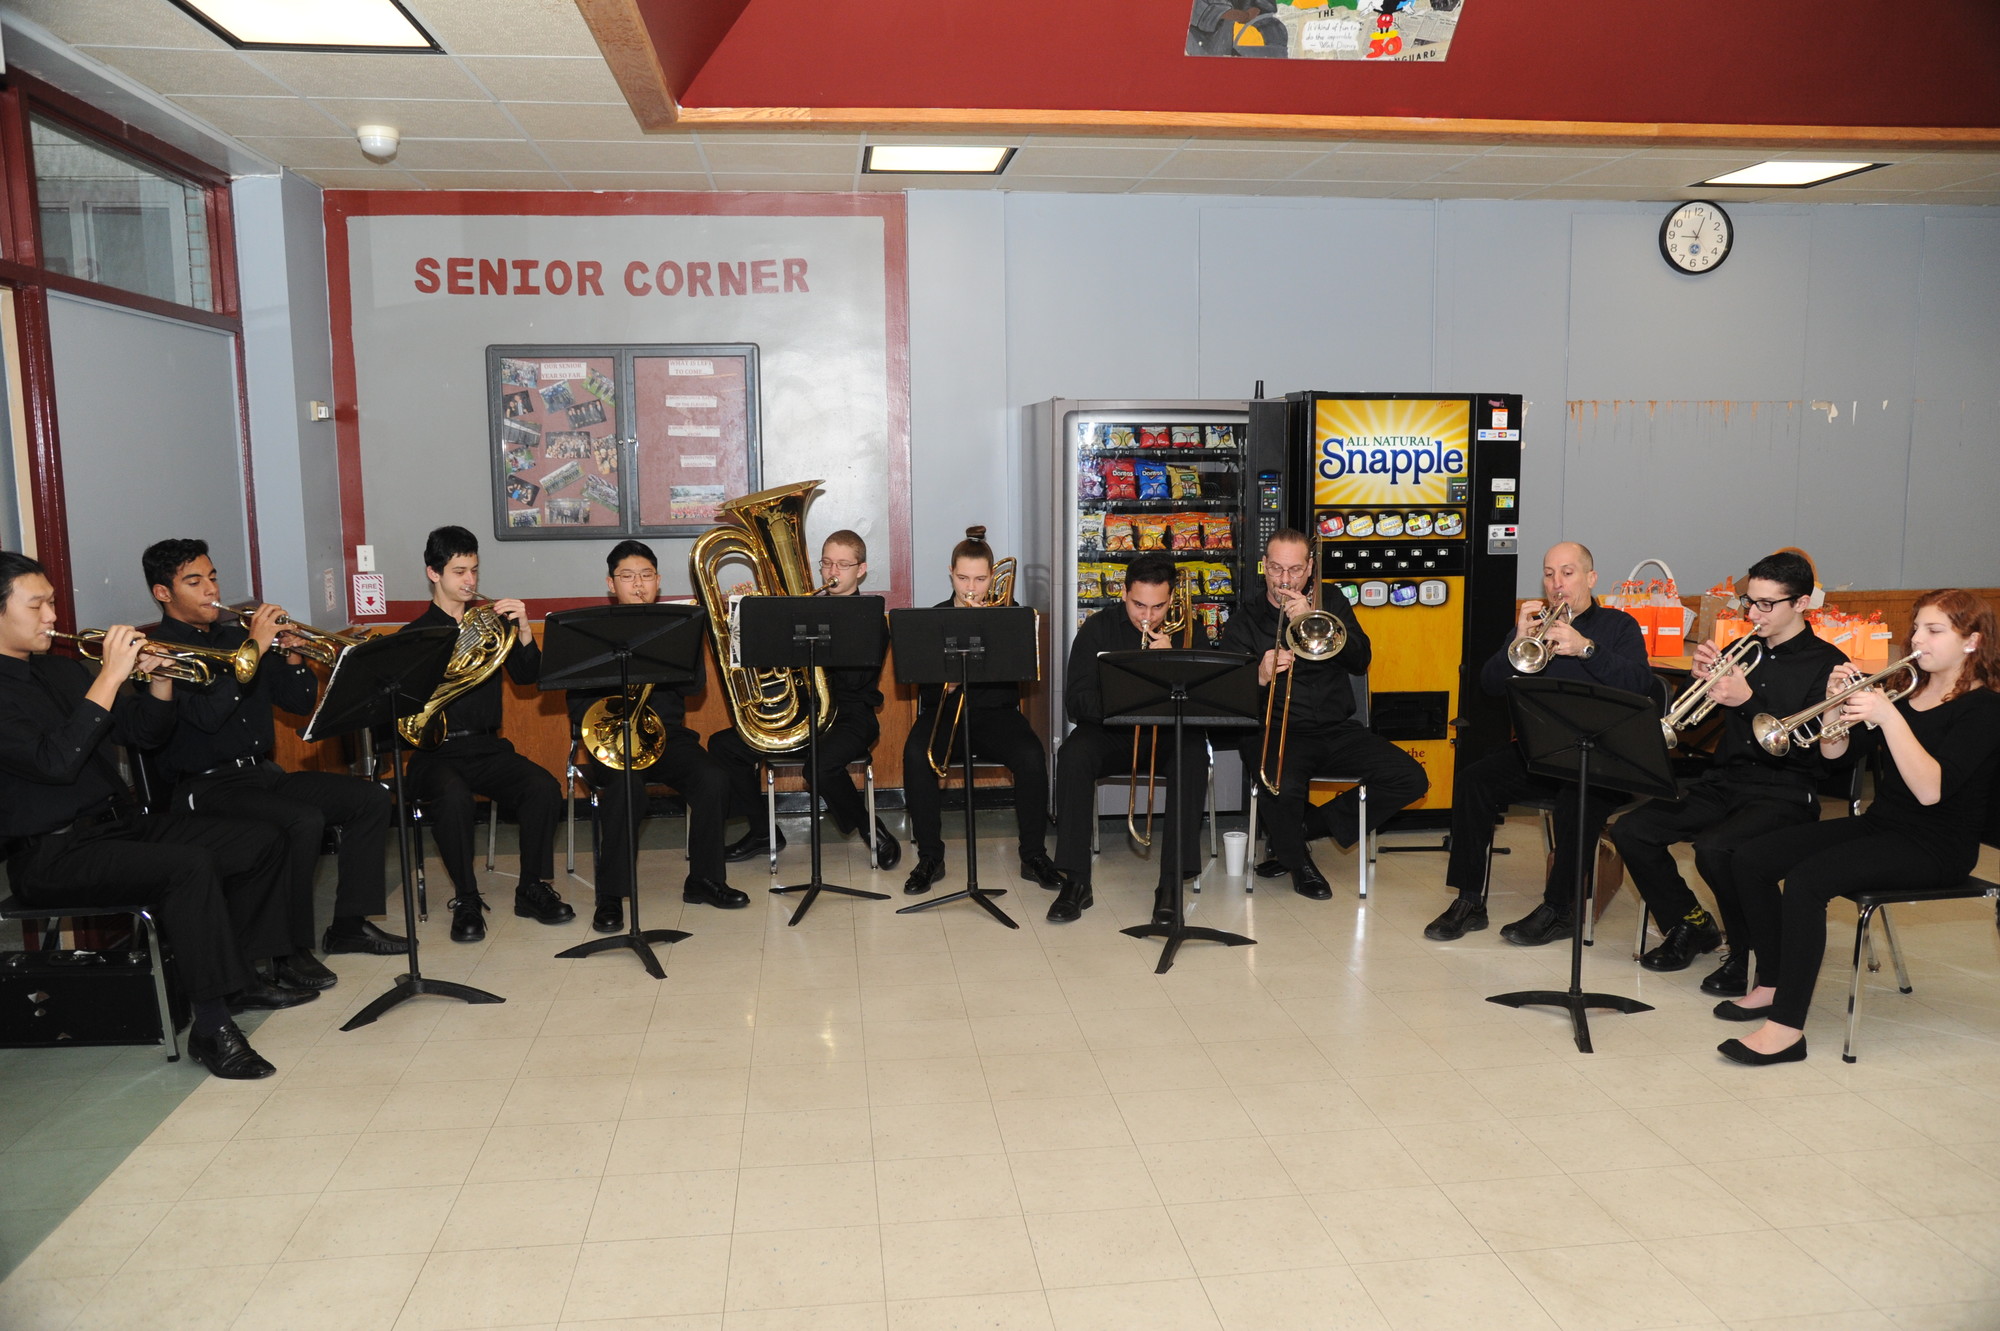 Clarke’s brass ensemble entertained the crowd before the contest began.